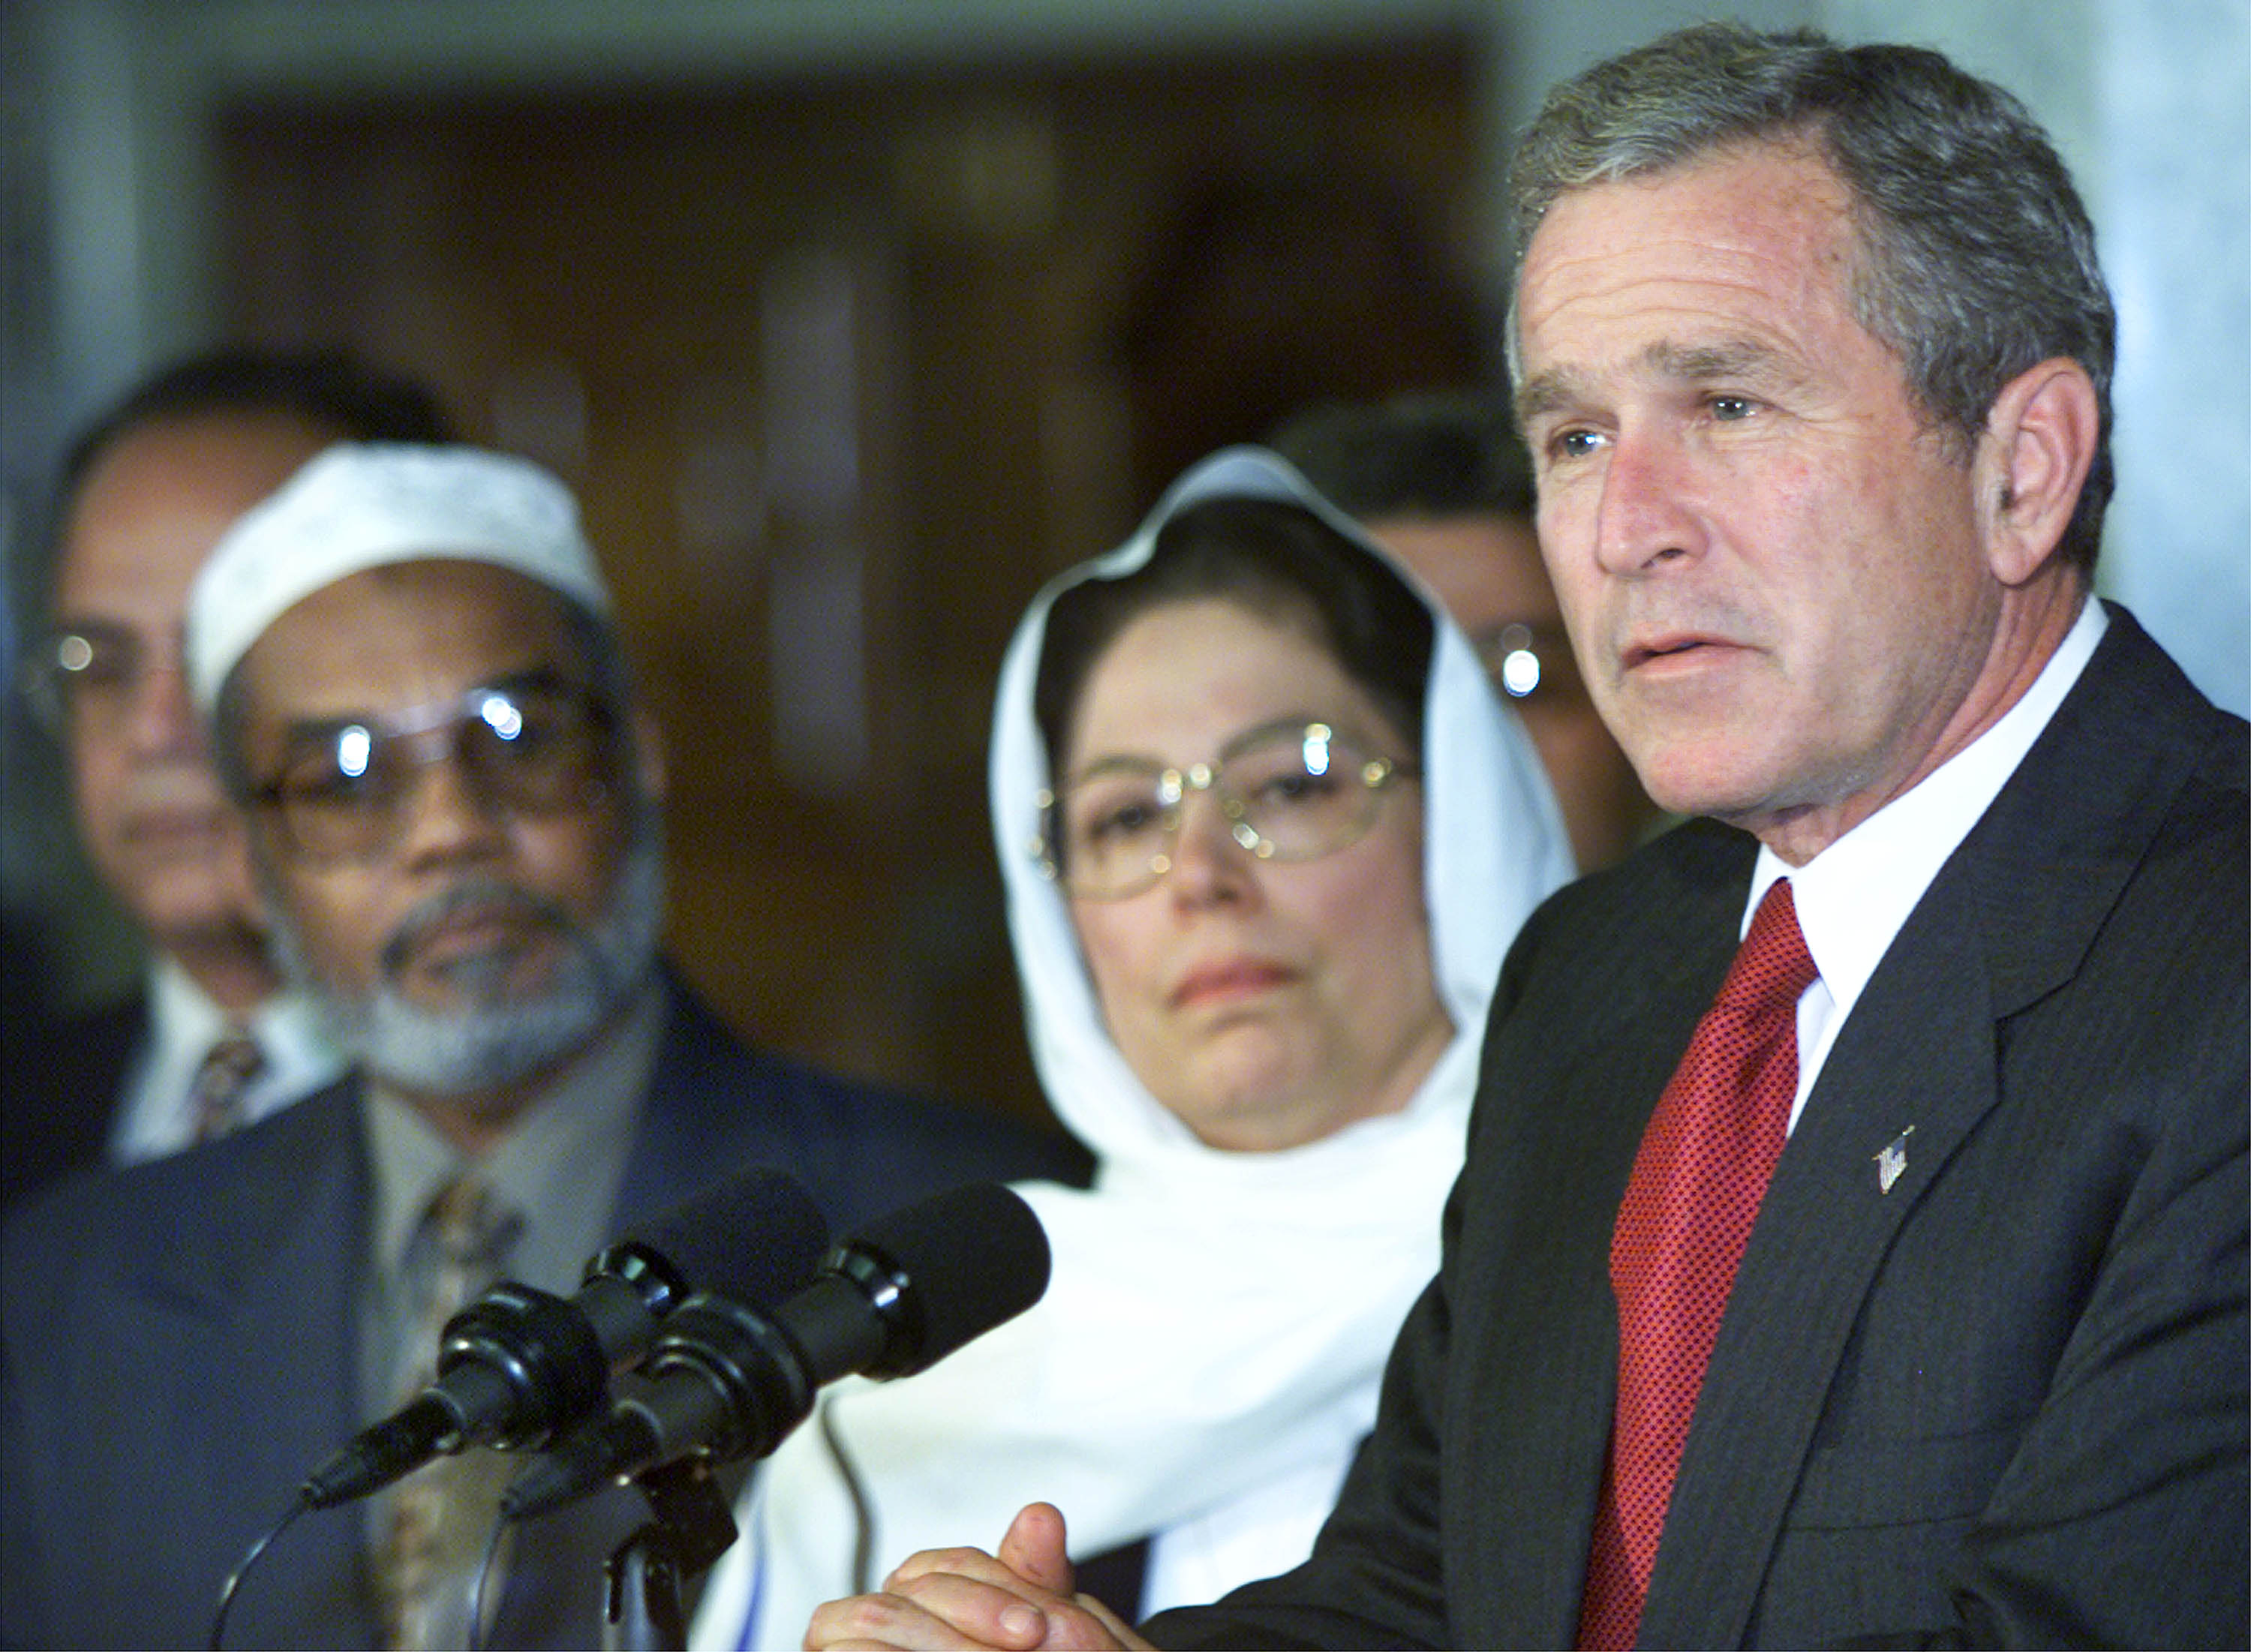 President George W. Bush speaks at an Islamic center, to try to put an end to rising anti-Muslim sentiment, on September 17, 2001. (Mark Wilson—Getty Images)